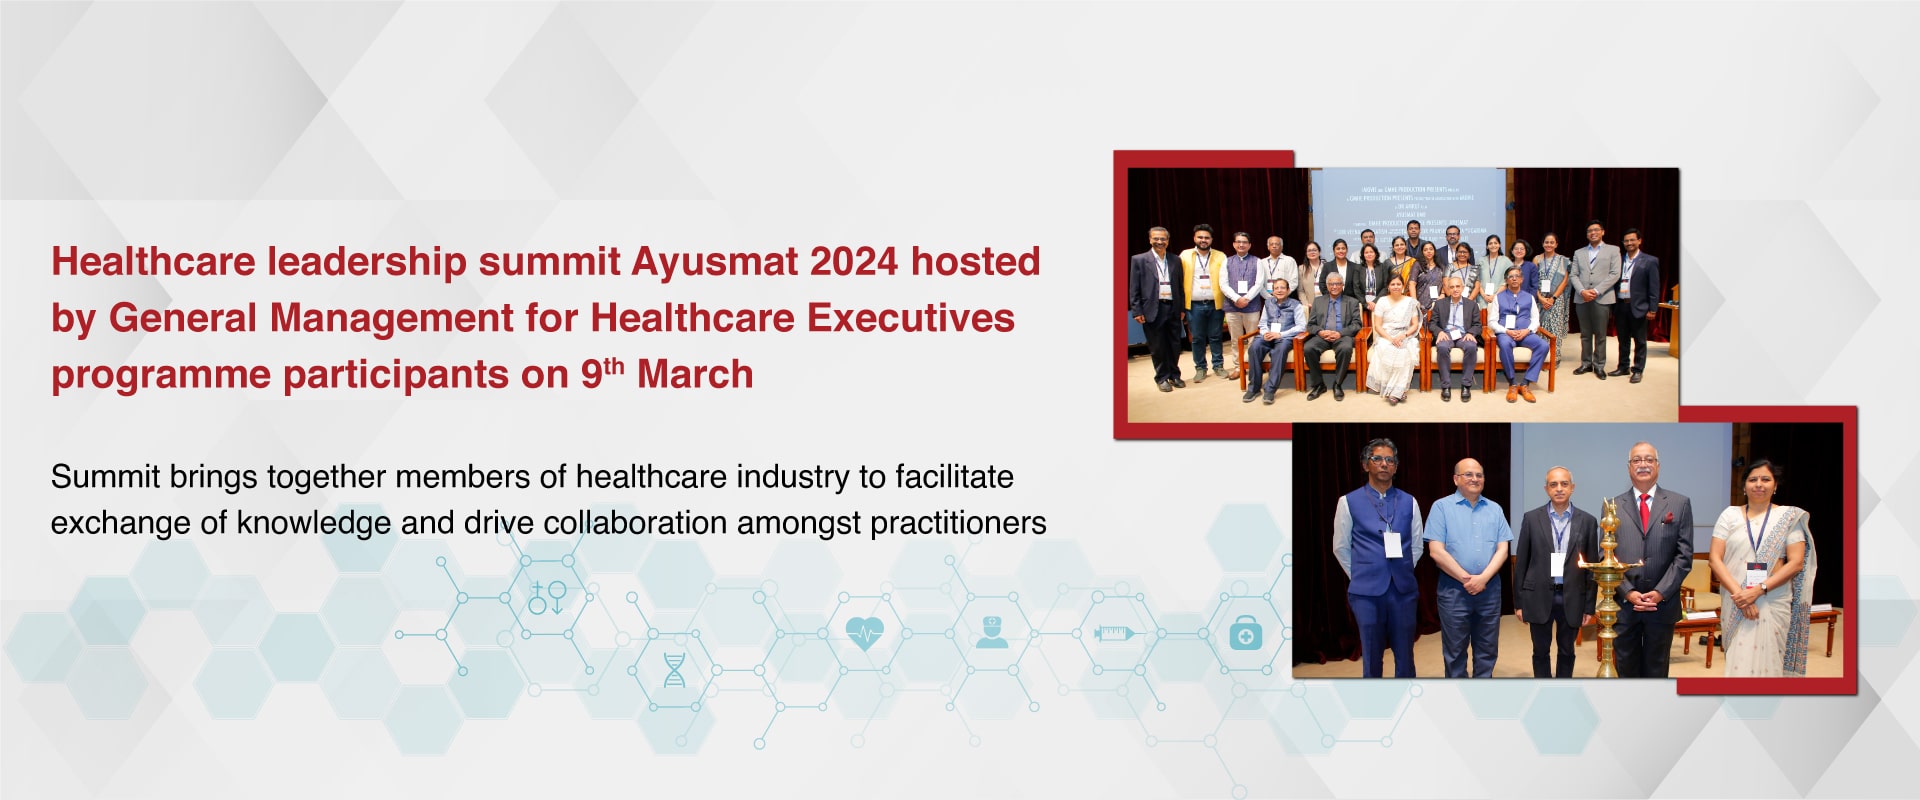 Healthcare leadership summit Ayusmat 2024 hosted by General Management for Healthcare Executives programme participants on 9th March